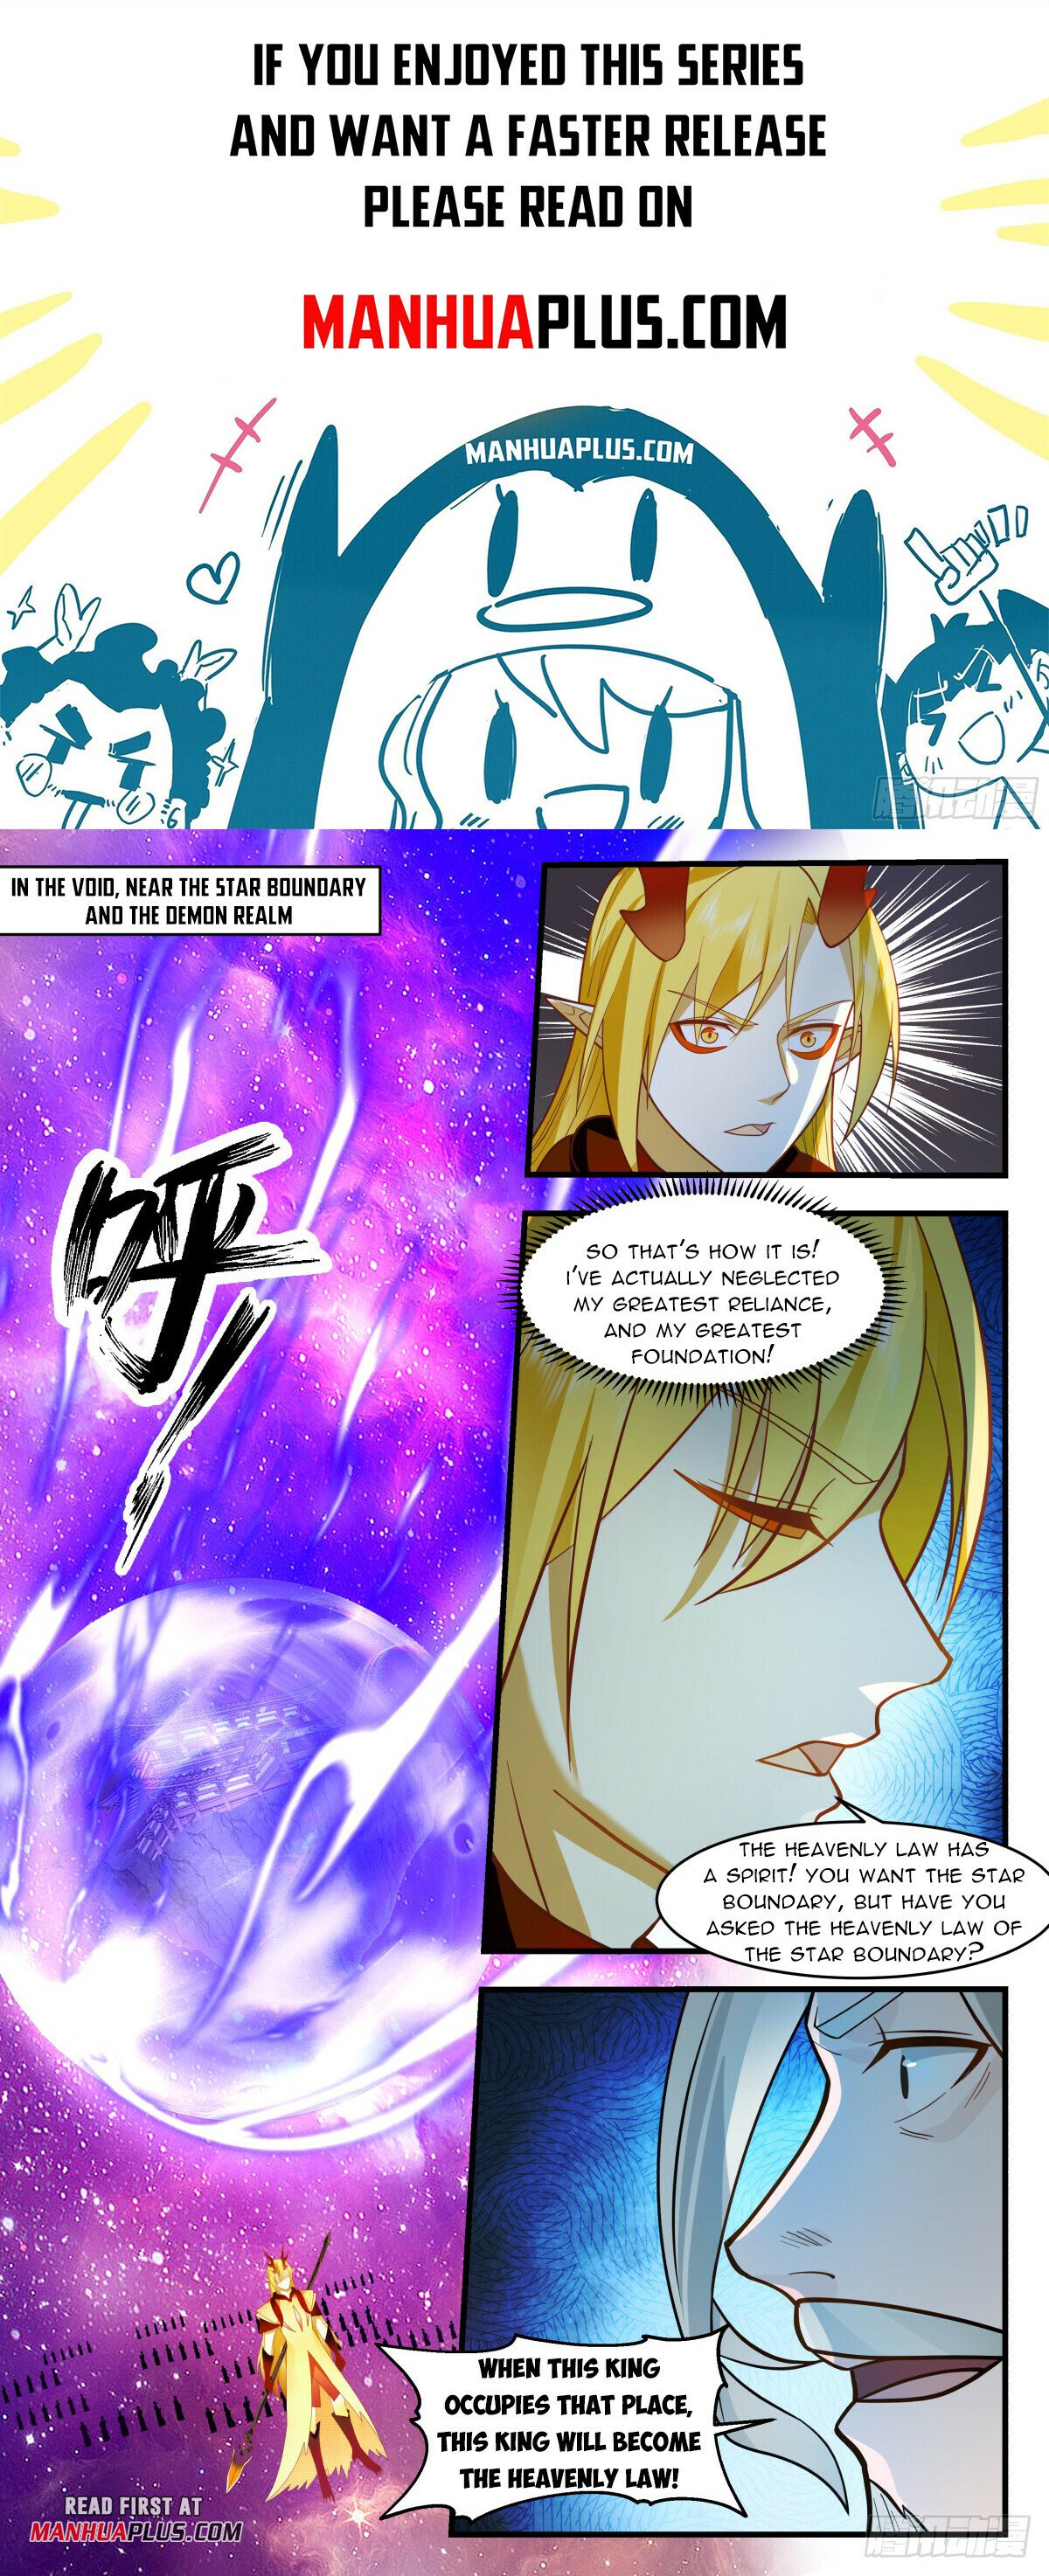 Martial Peak - Chapter 21197 - Heaven and Earth, Lend Me Your Strength! - Image 1